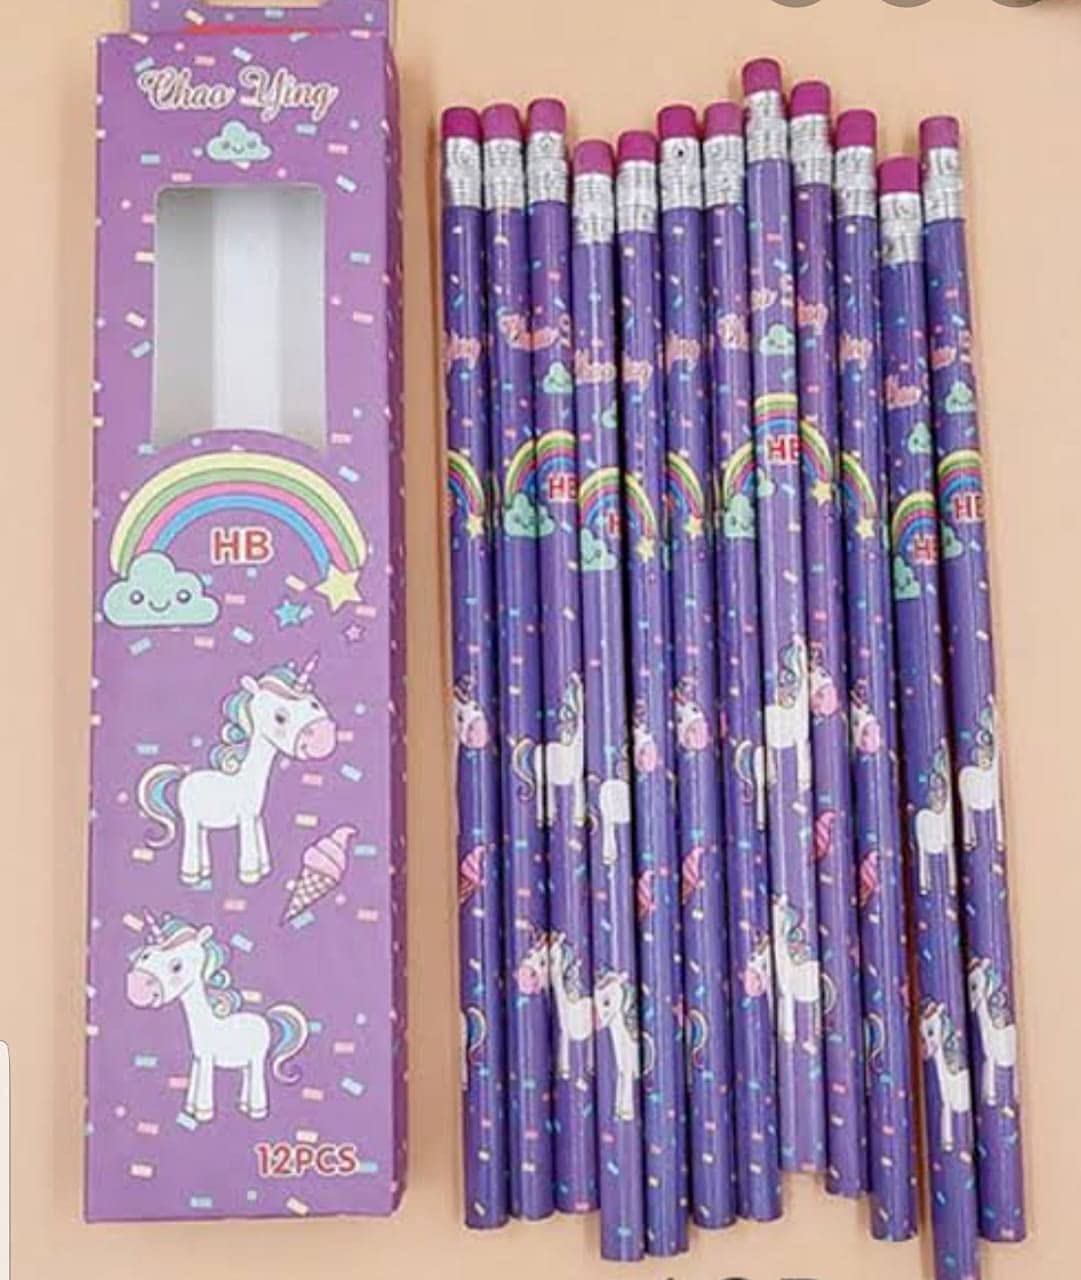 Unicorn pencils with rubber tip (1 Pack OF 12 Pencils)